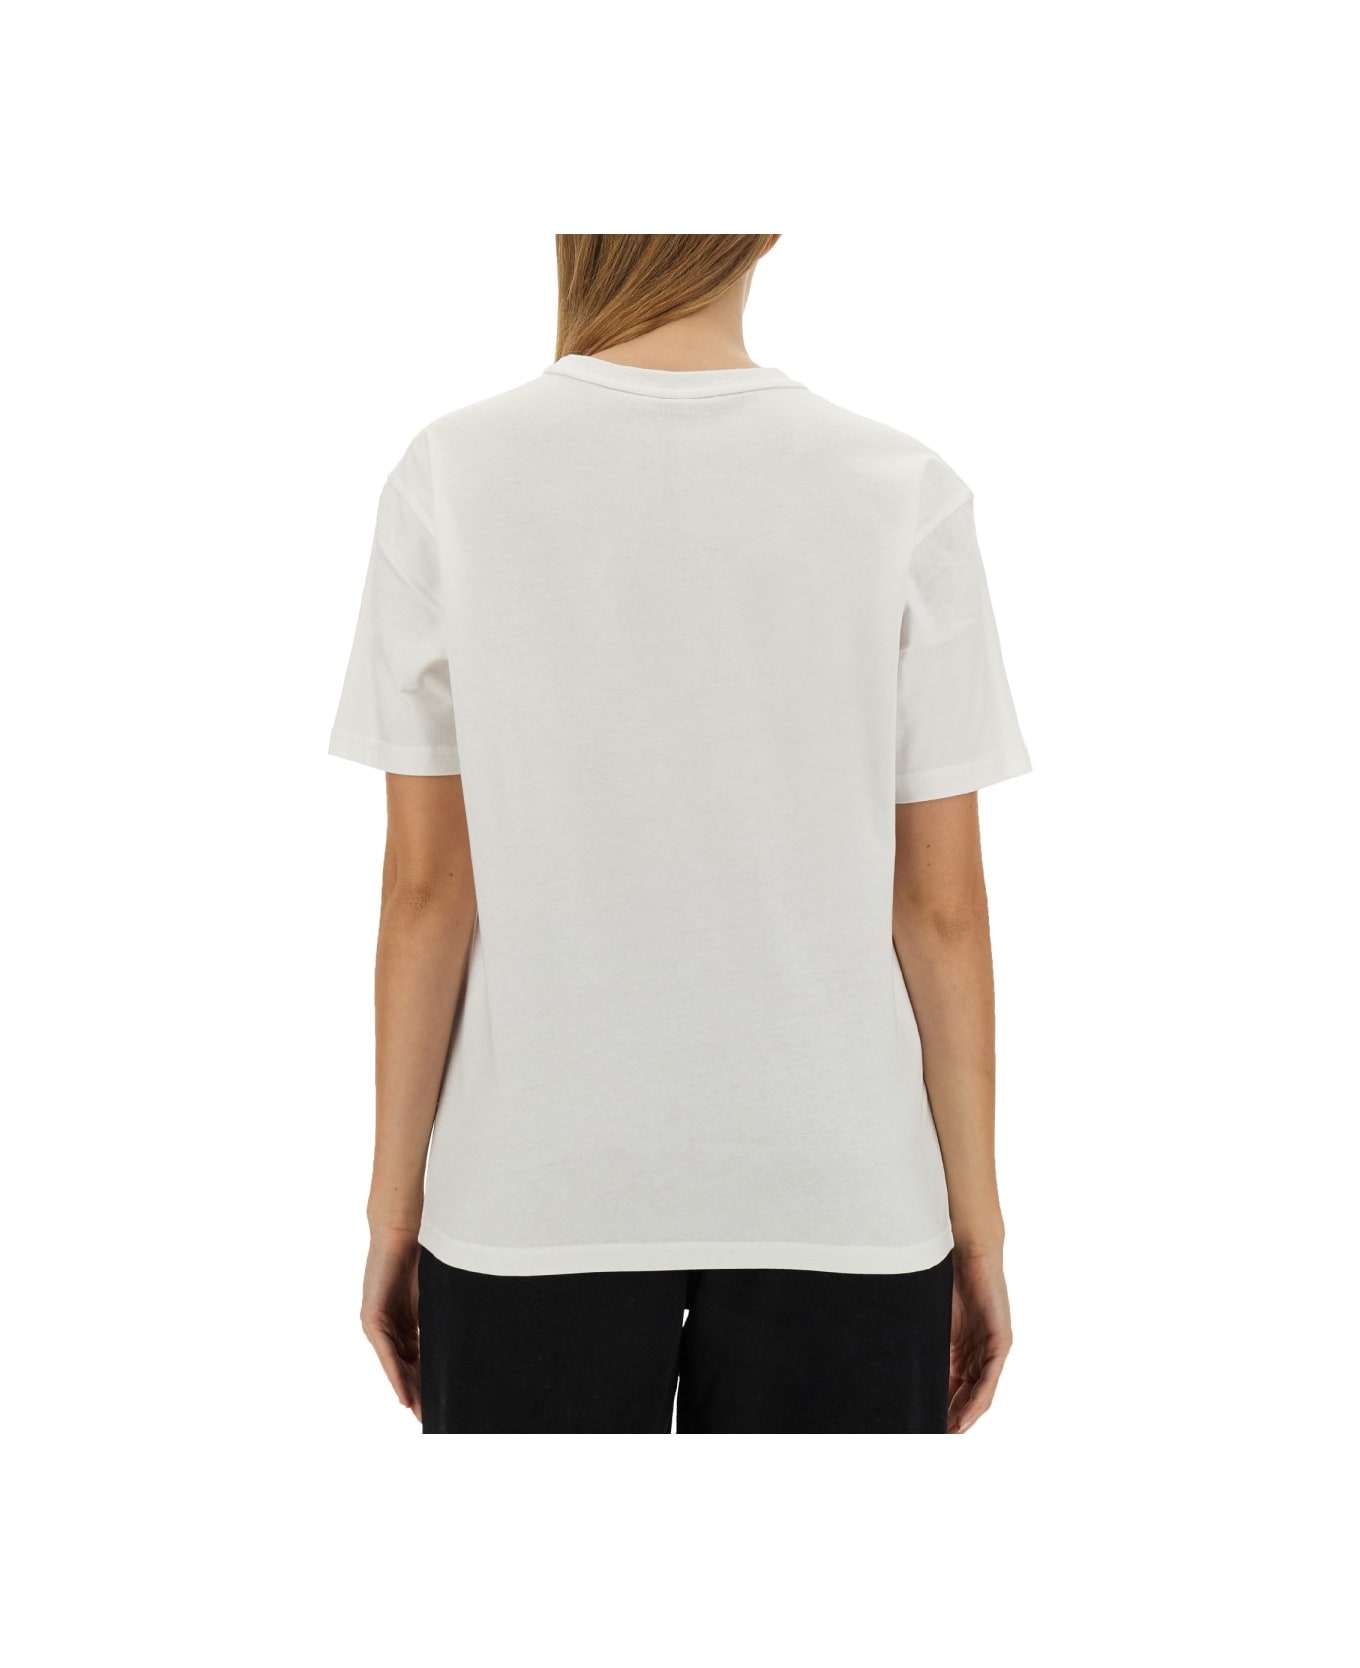 T by Alexander Wang Essential T-shirt - WHITE